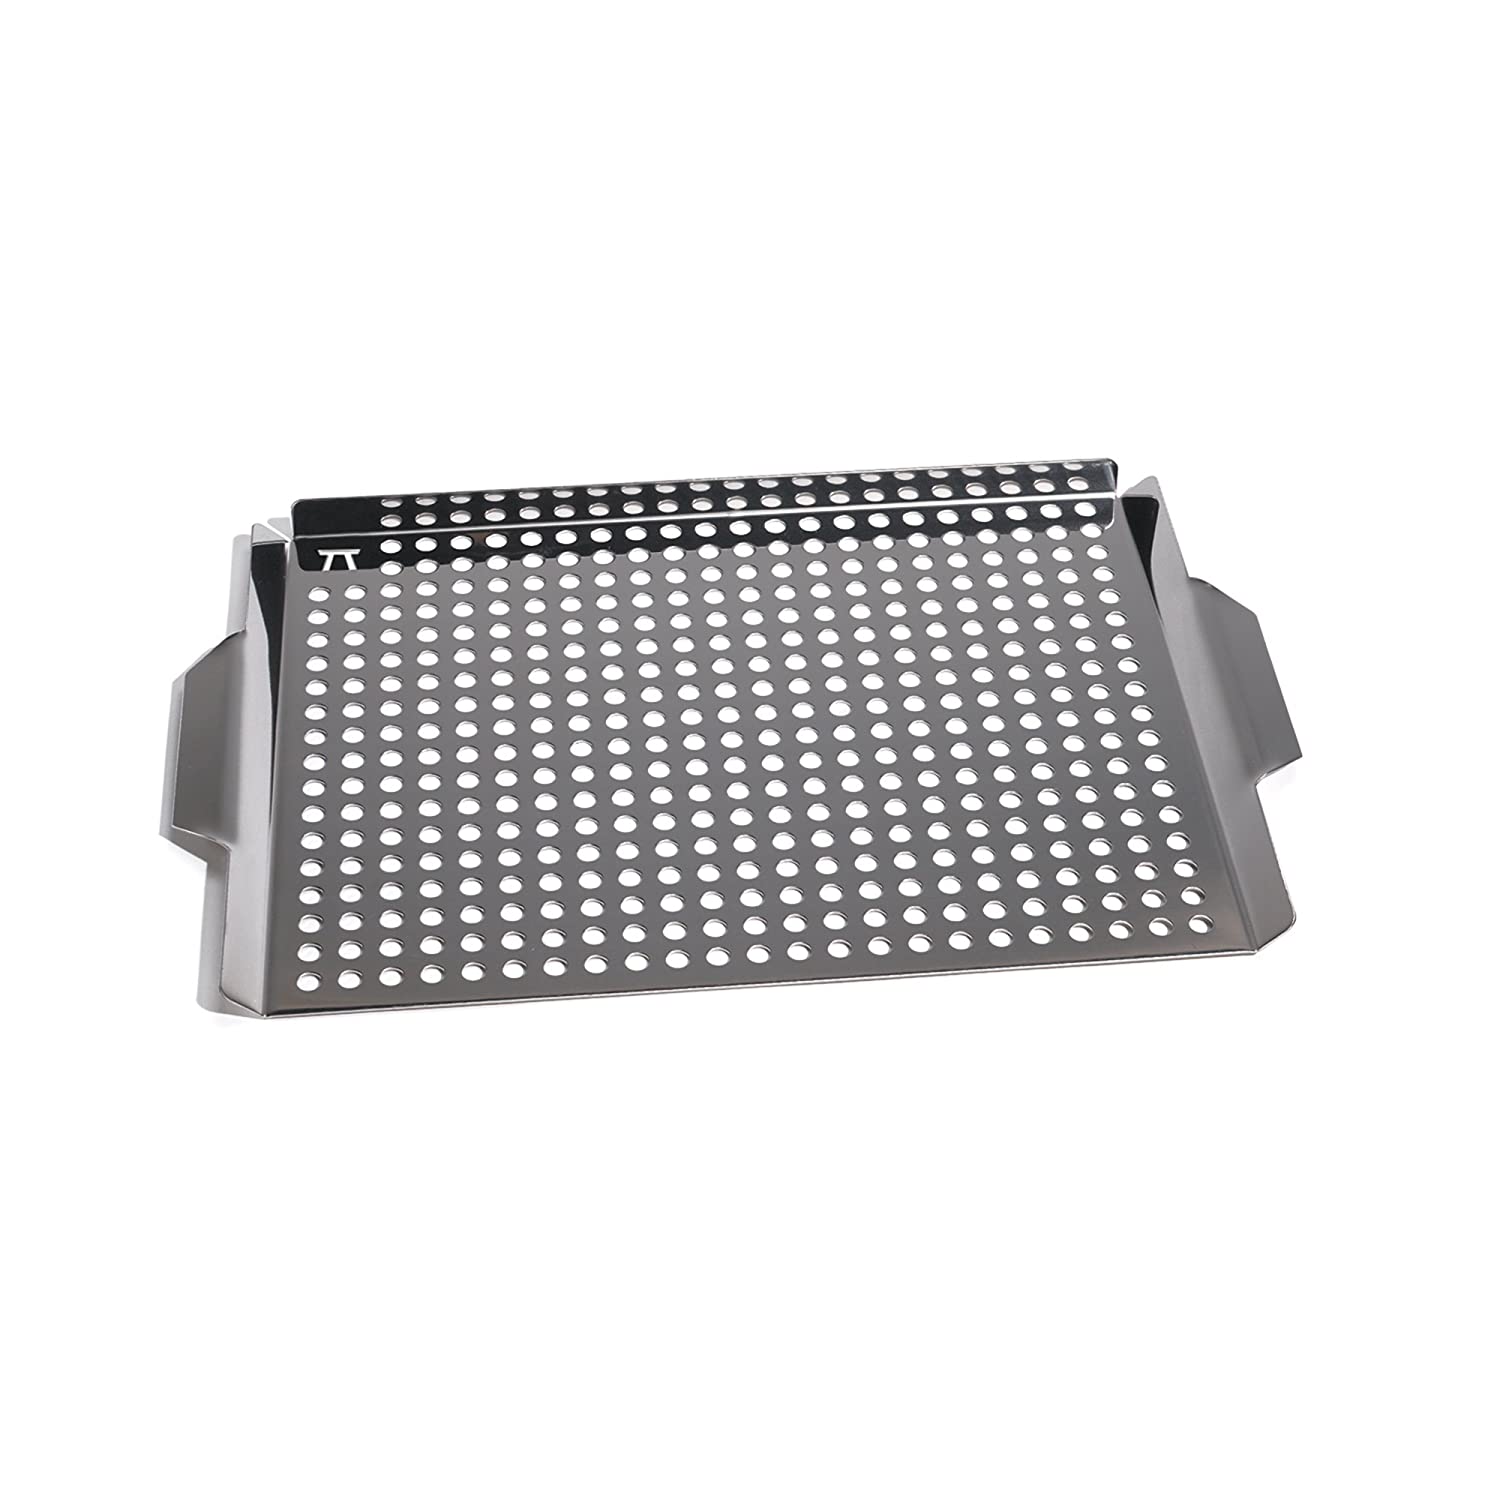 Outset Stainless Steel Grill Grid, 17" x 11"